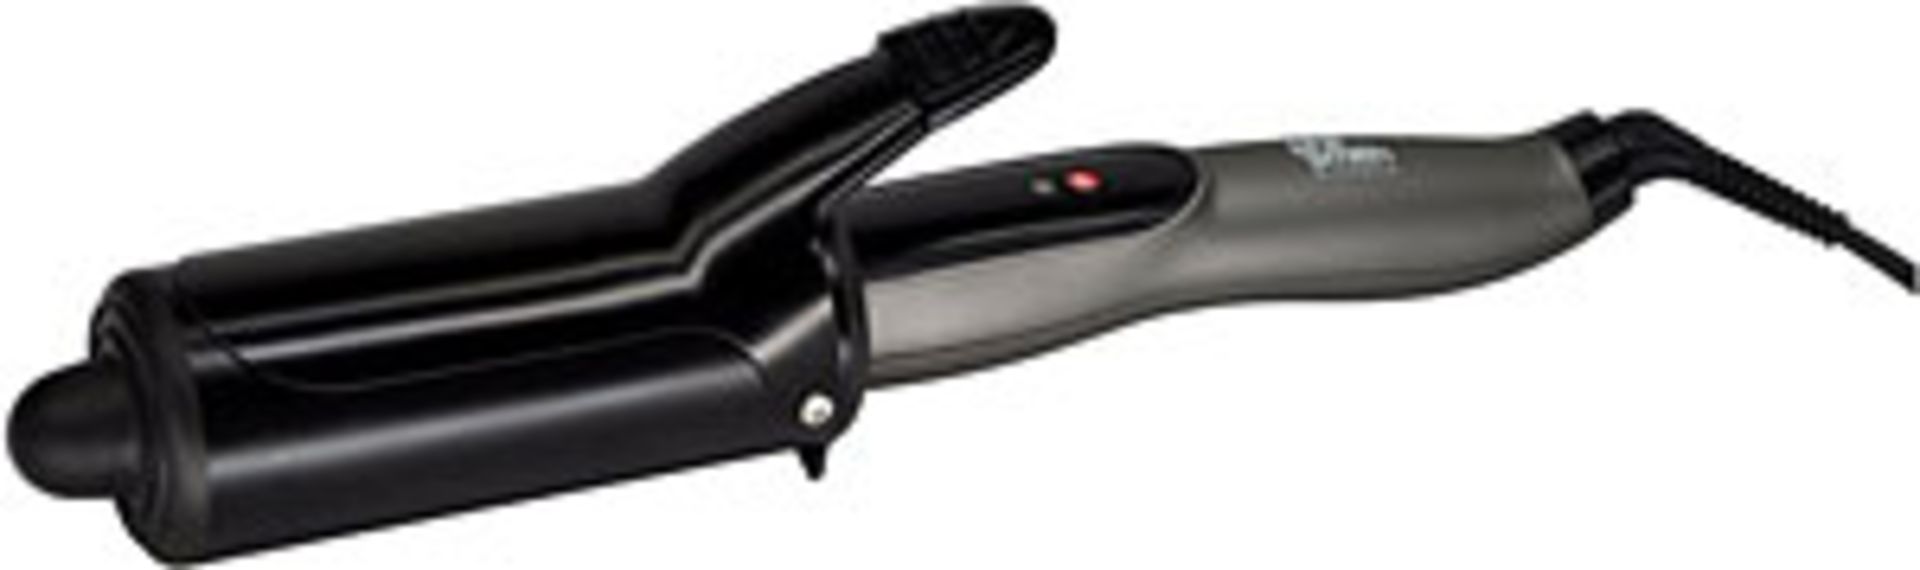 V Brand New Phil Smith Salon Collection Jumbo Hair Curler Fast Curls With No Kinks X 2 Bid price